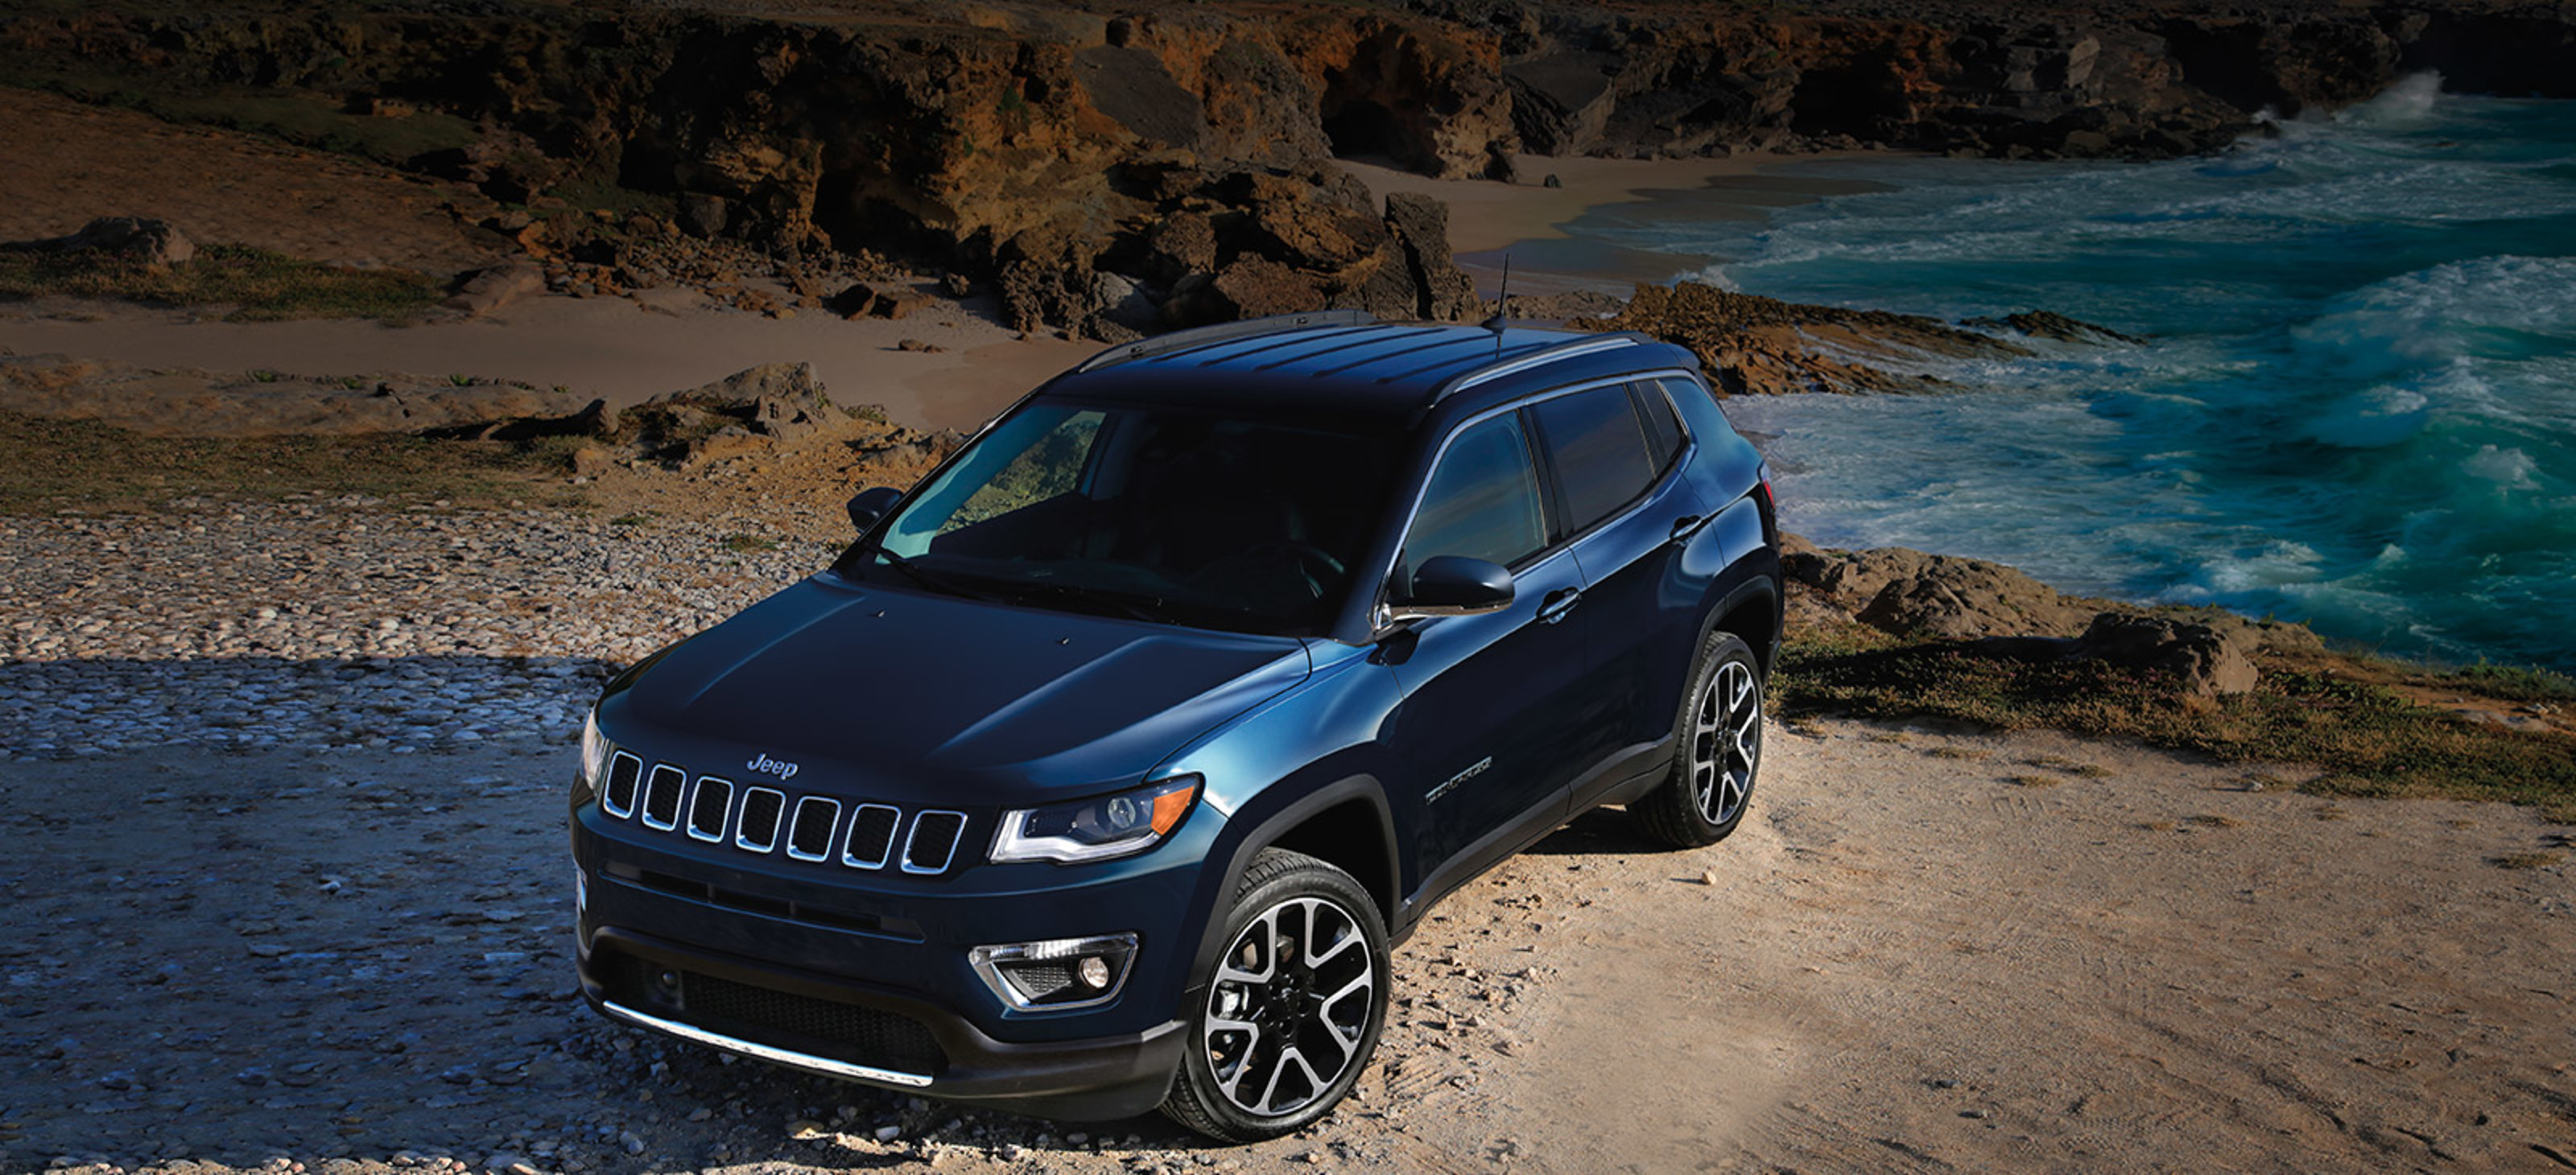 An overhead view of a Jazz Blue Pearl 2021 Jeep Compass parked on the beach with waves in the background.